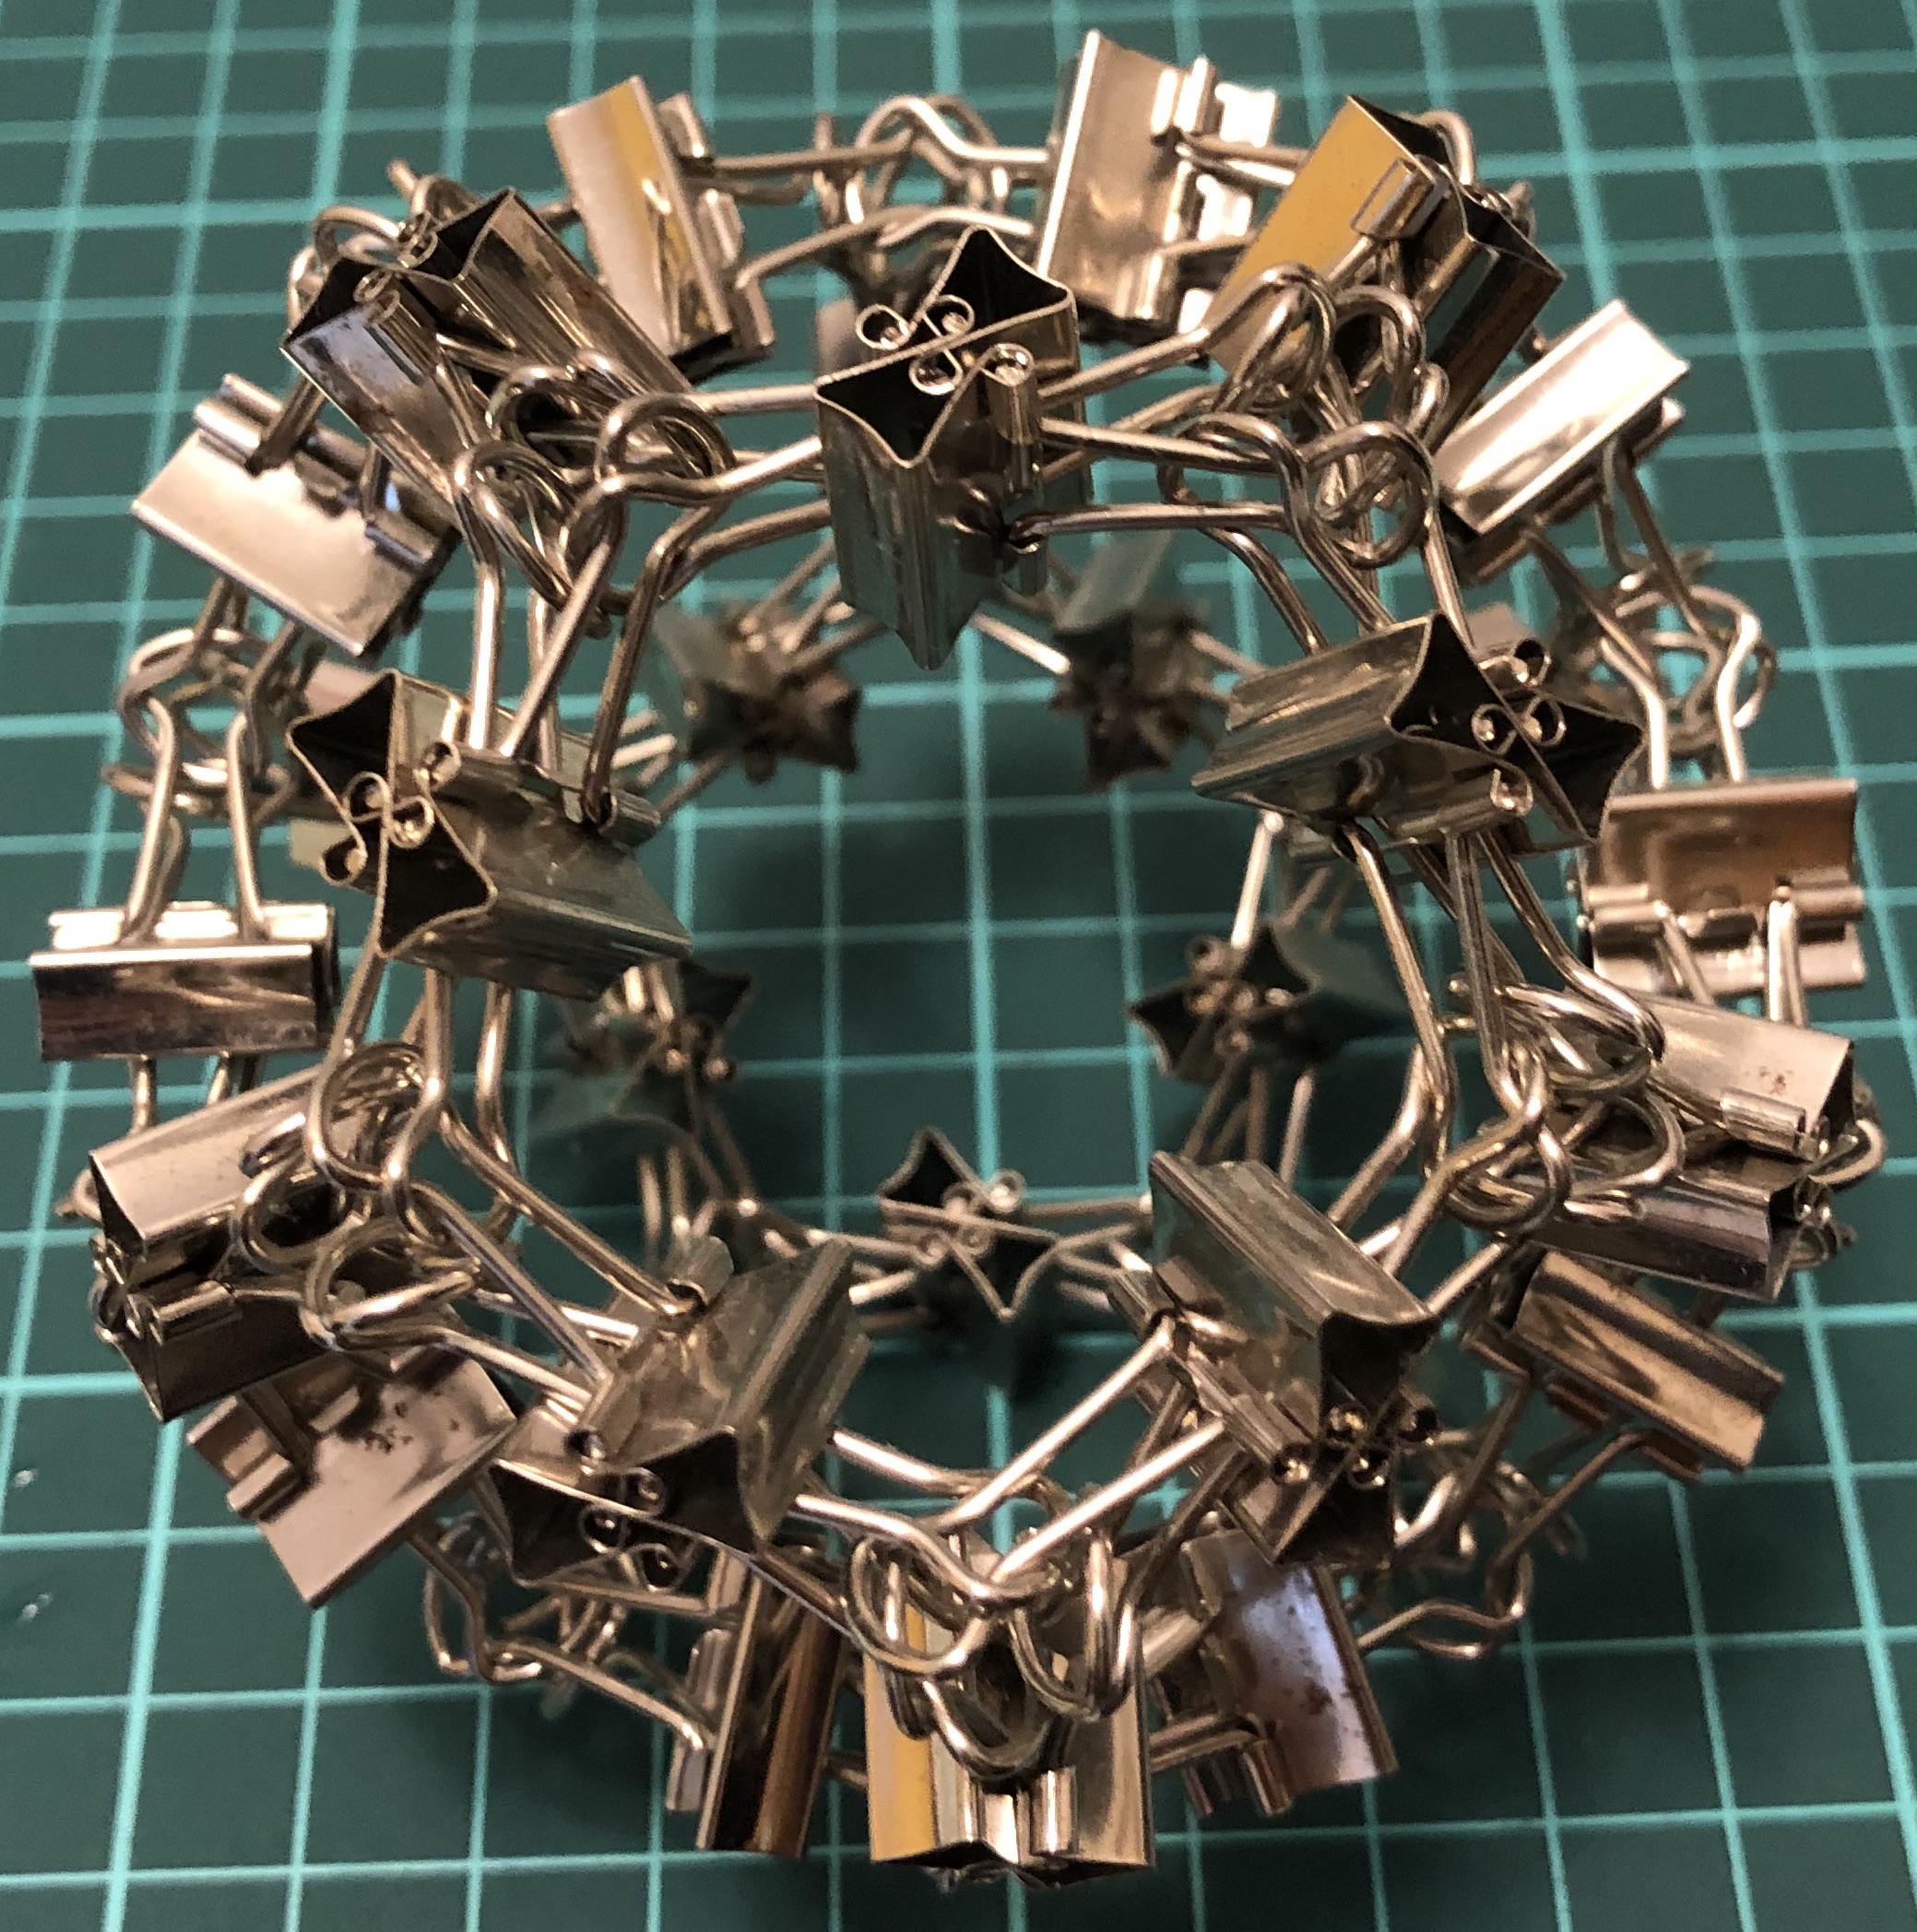 60 clips forming 30 I-edges forming dodecahedron